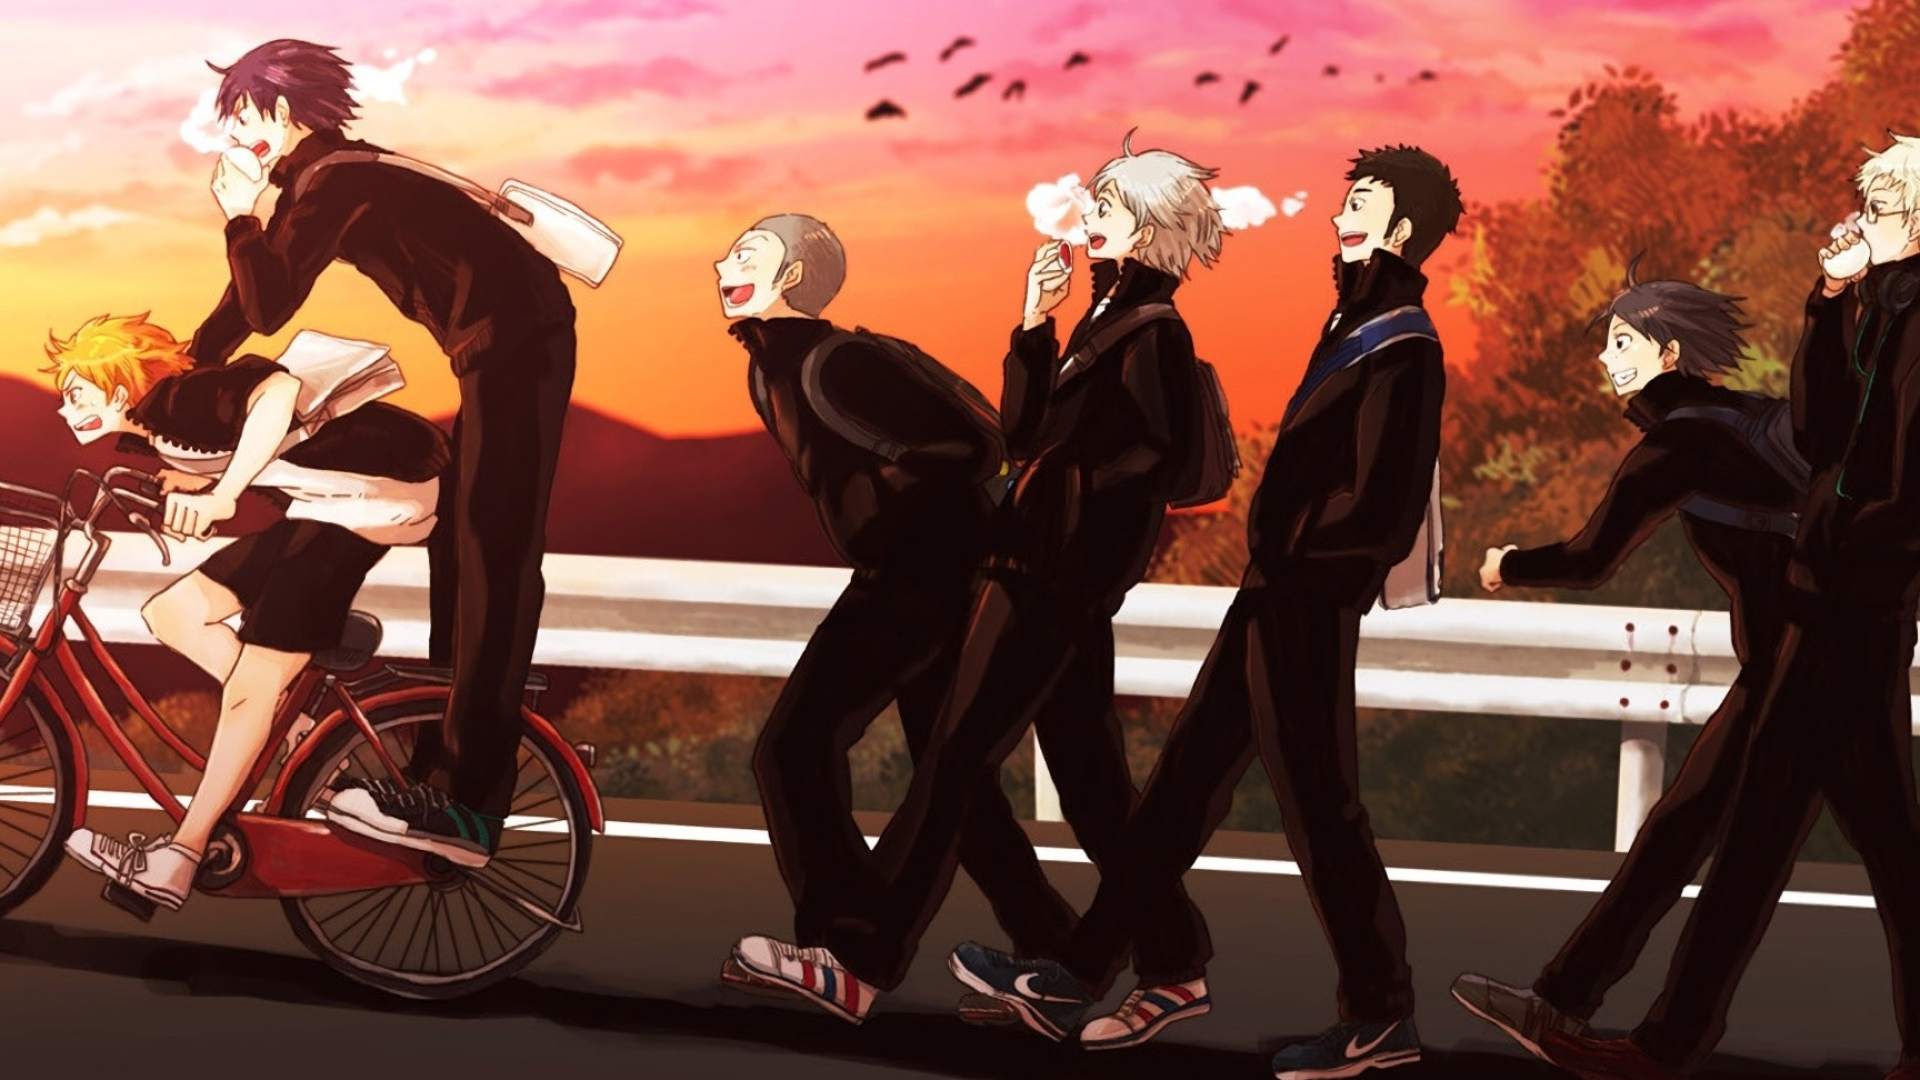 Haikyuu!!: Volleyball, Friends, Position number 10. 1920x1080 Full HD Background.